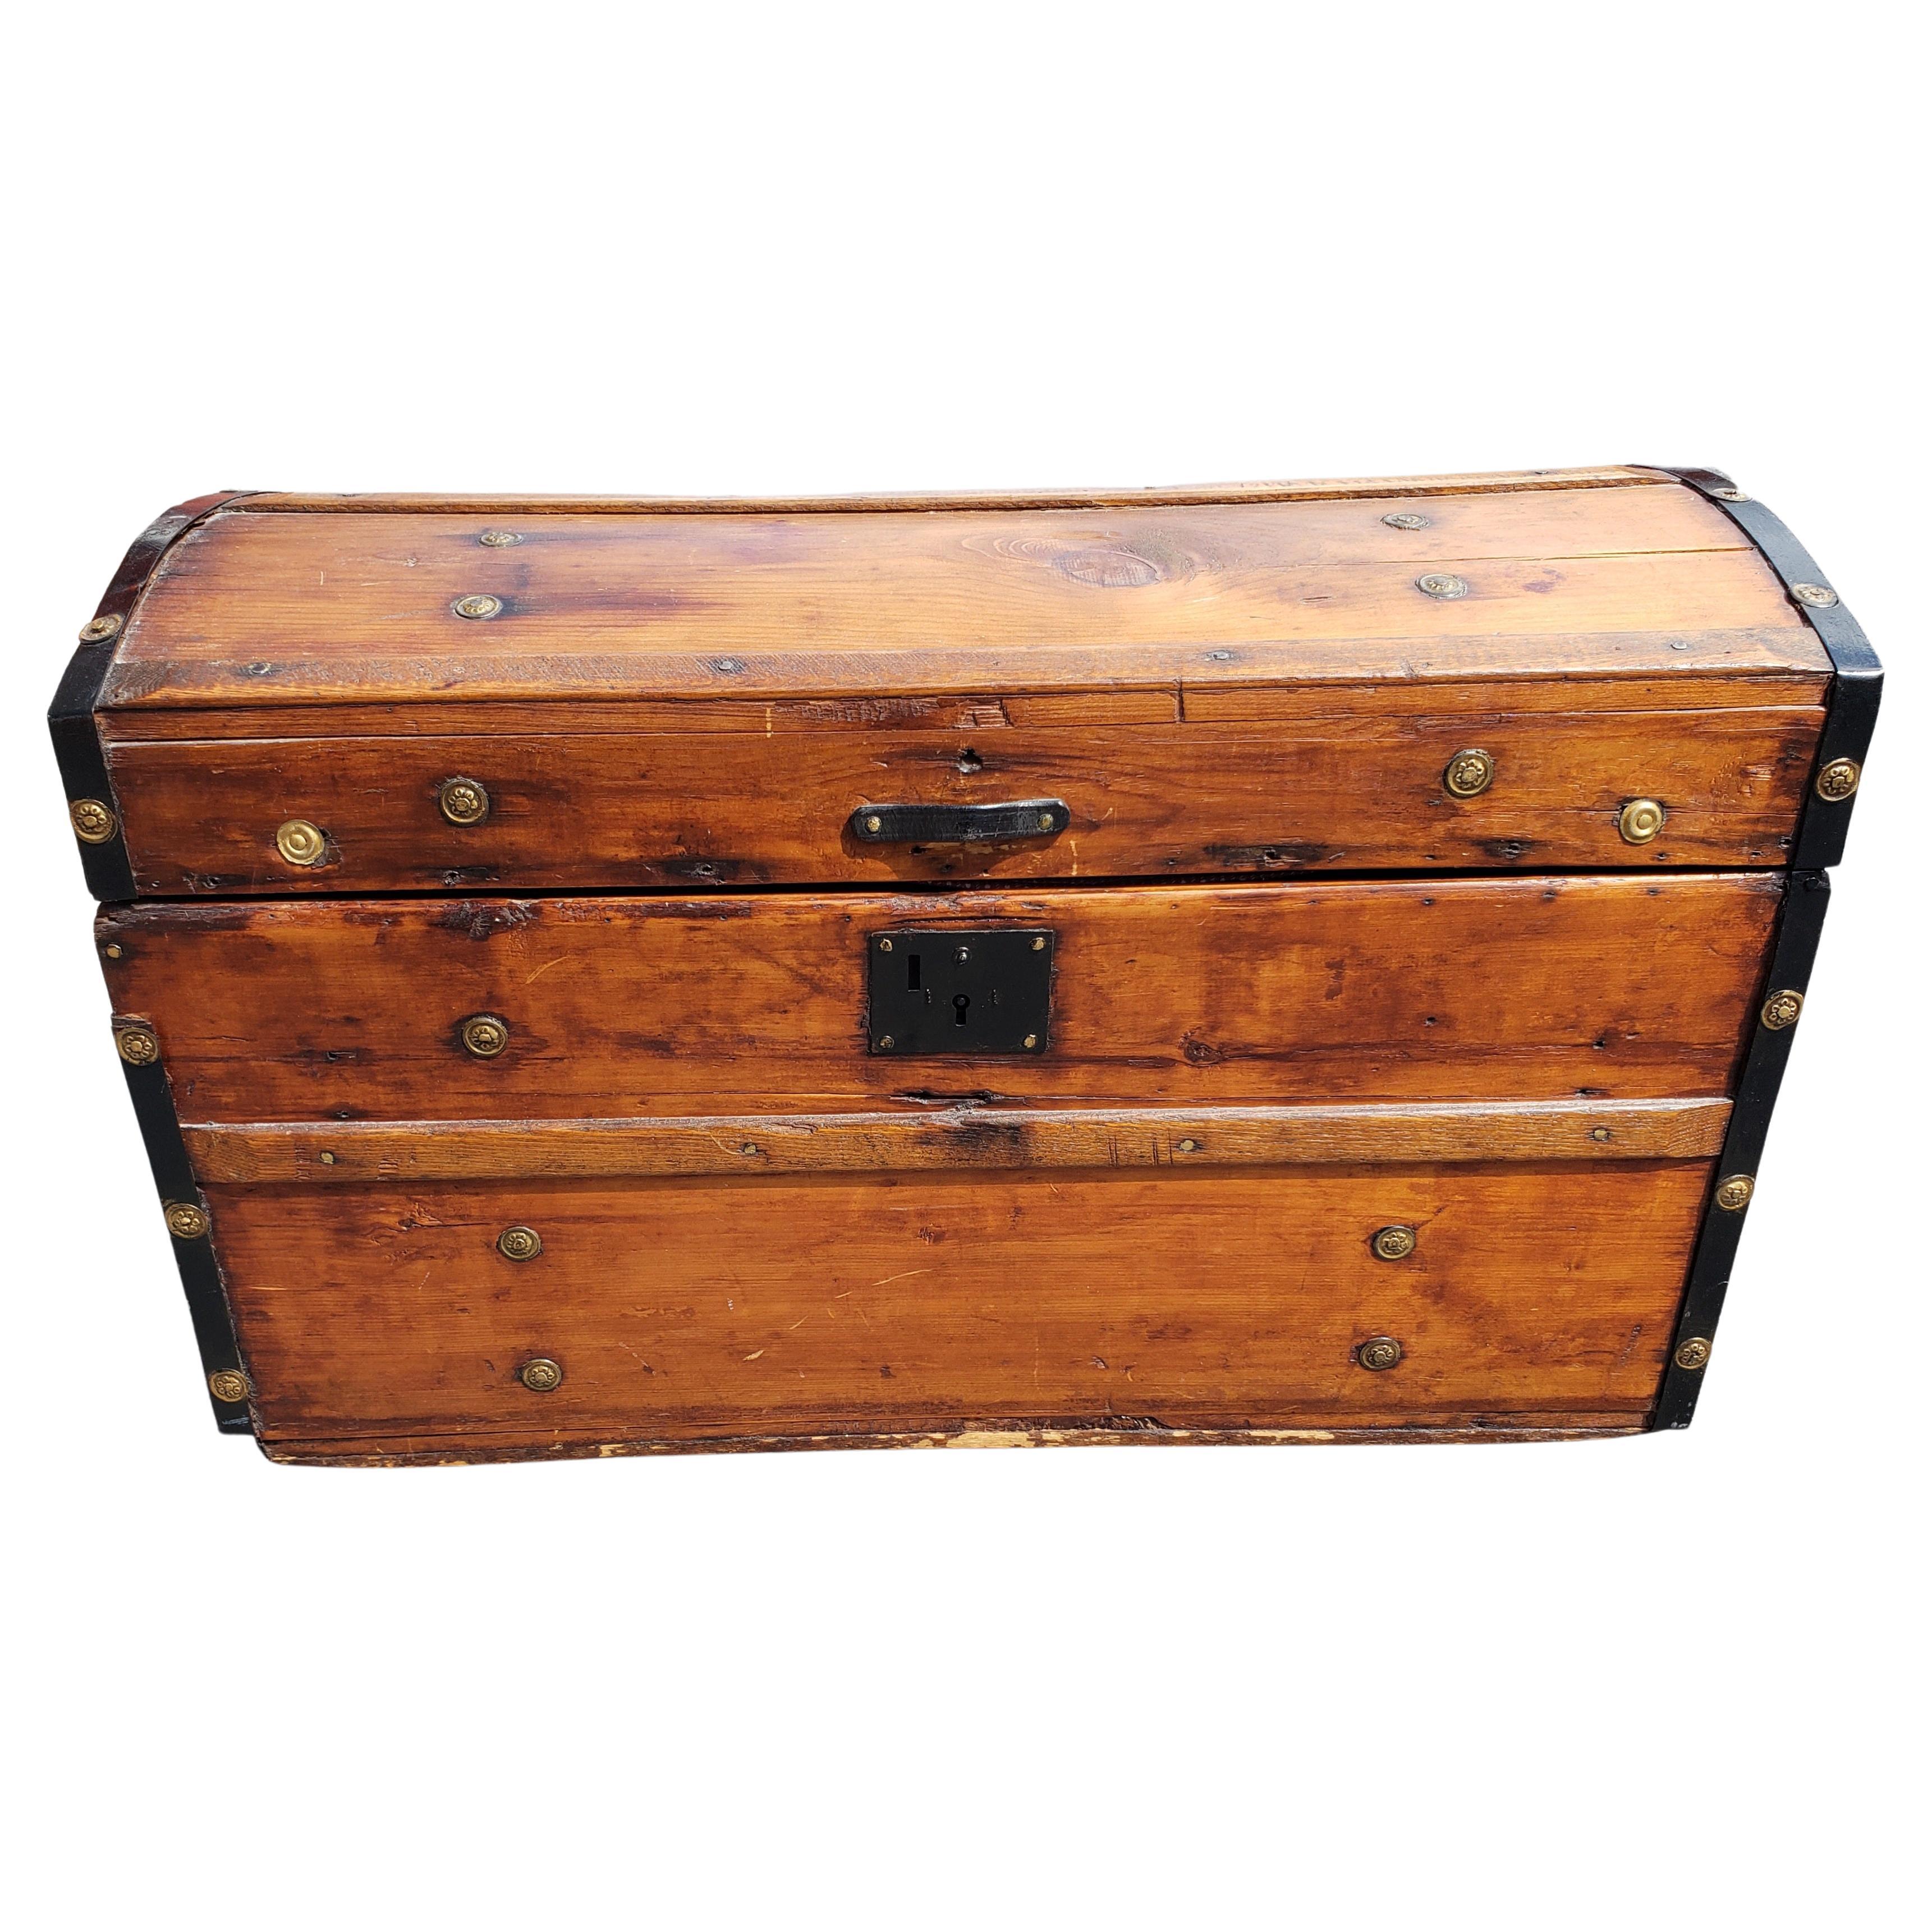 Early American Style Refinished Pine and Metal Blanket Chest / Trunk, Circa 1920 For Sale